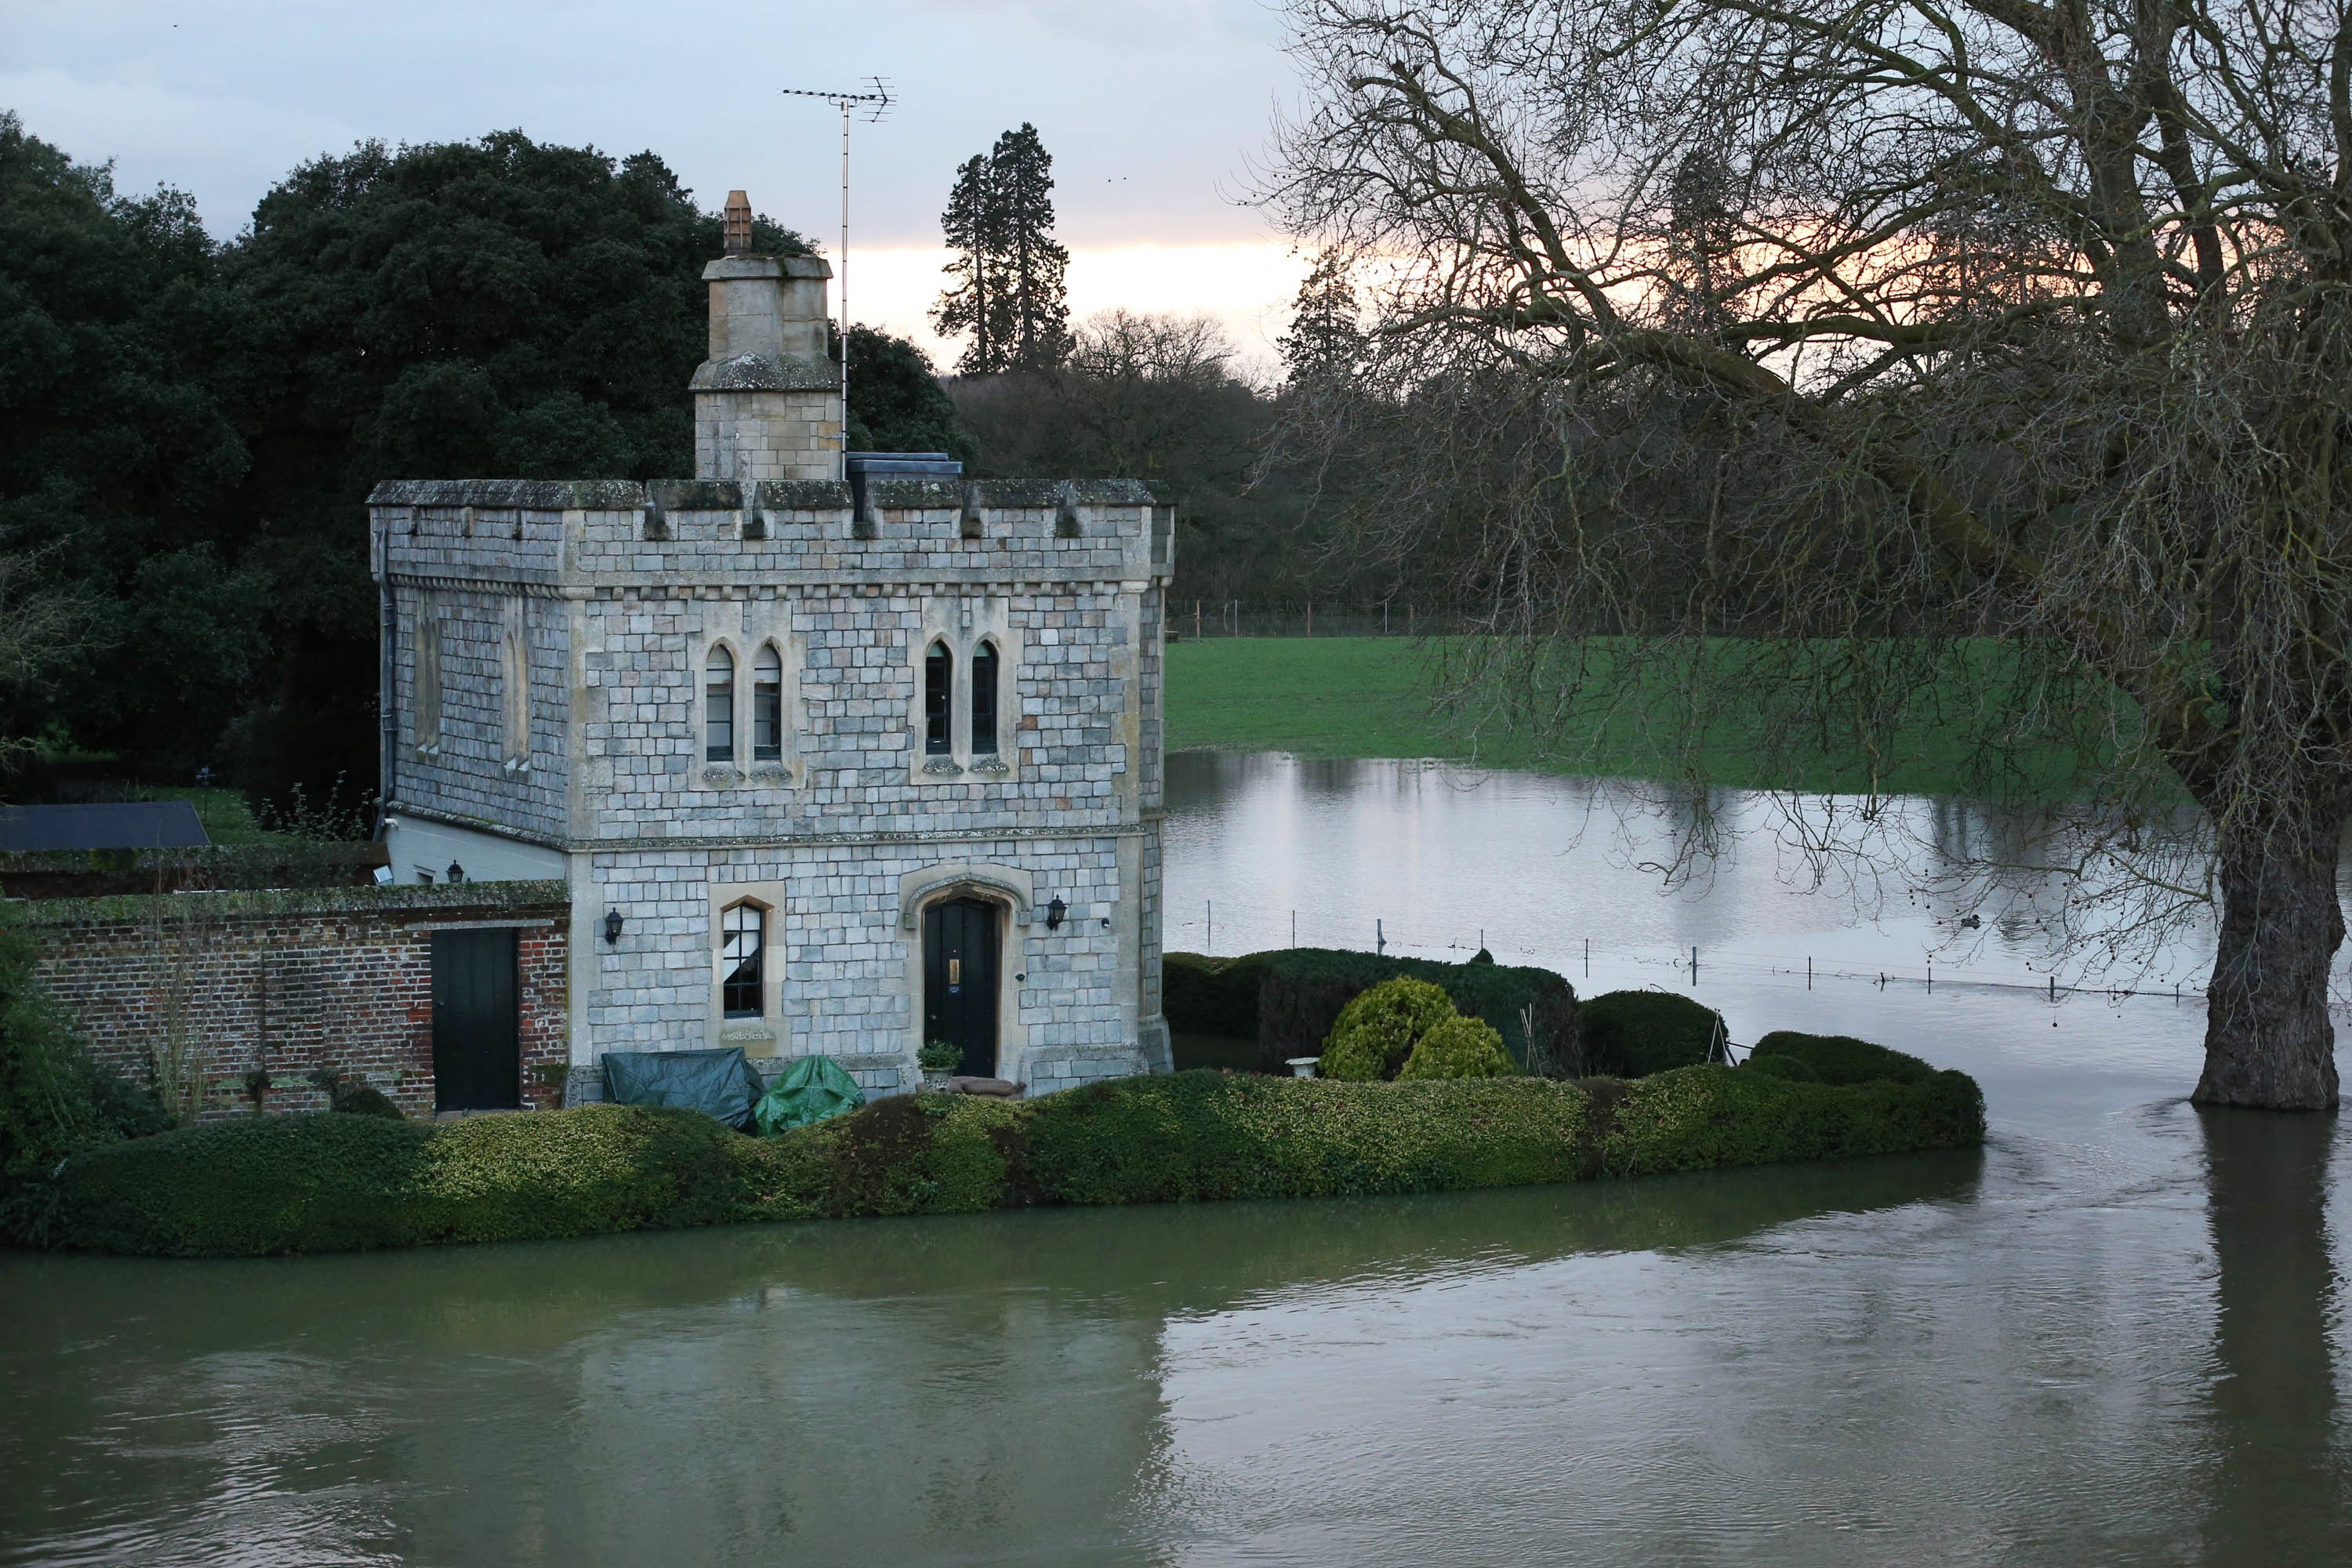 A Royal Lodge in the grounds of Windsor Castle is surrounded by flood water after The river Thames burst it's banks on February 10, 2014 in Datchet, England. | Source: Getty Images